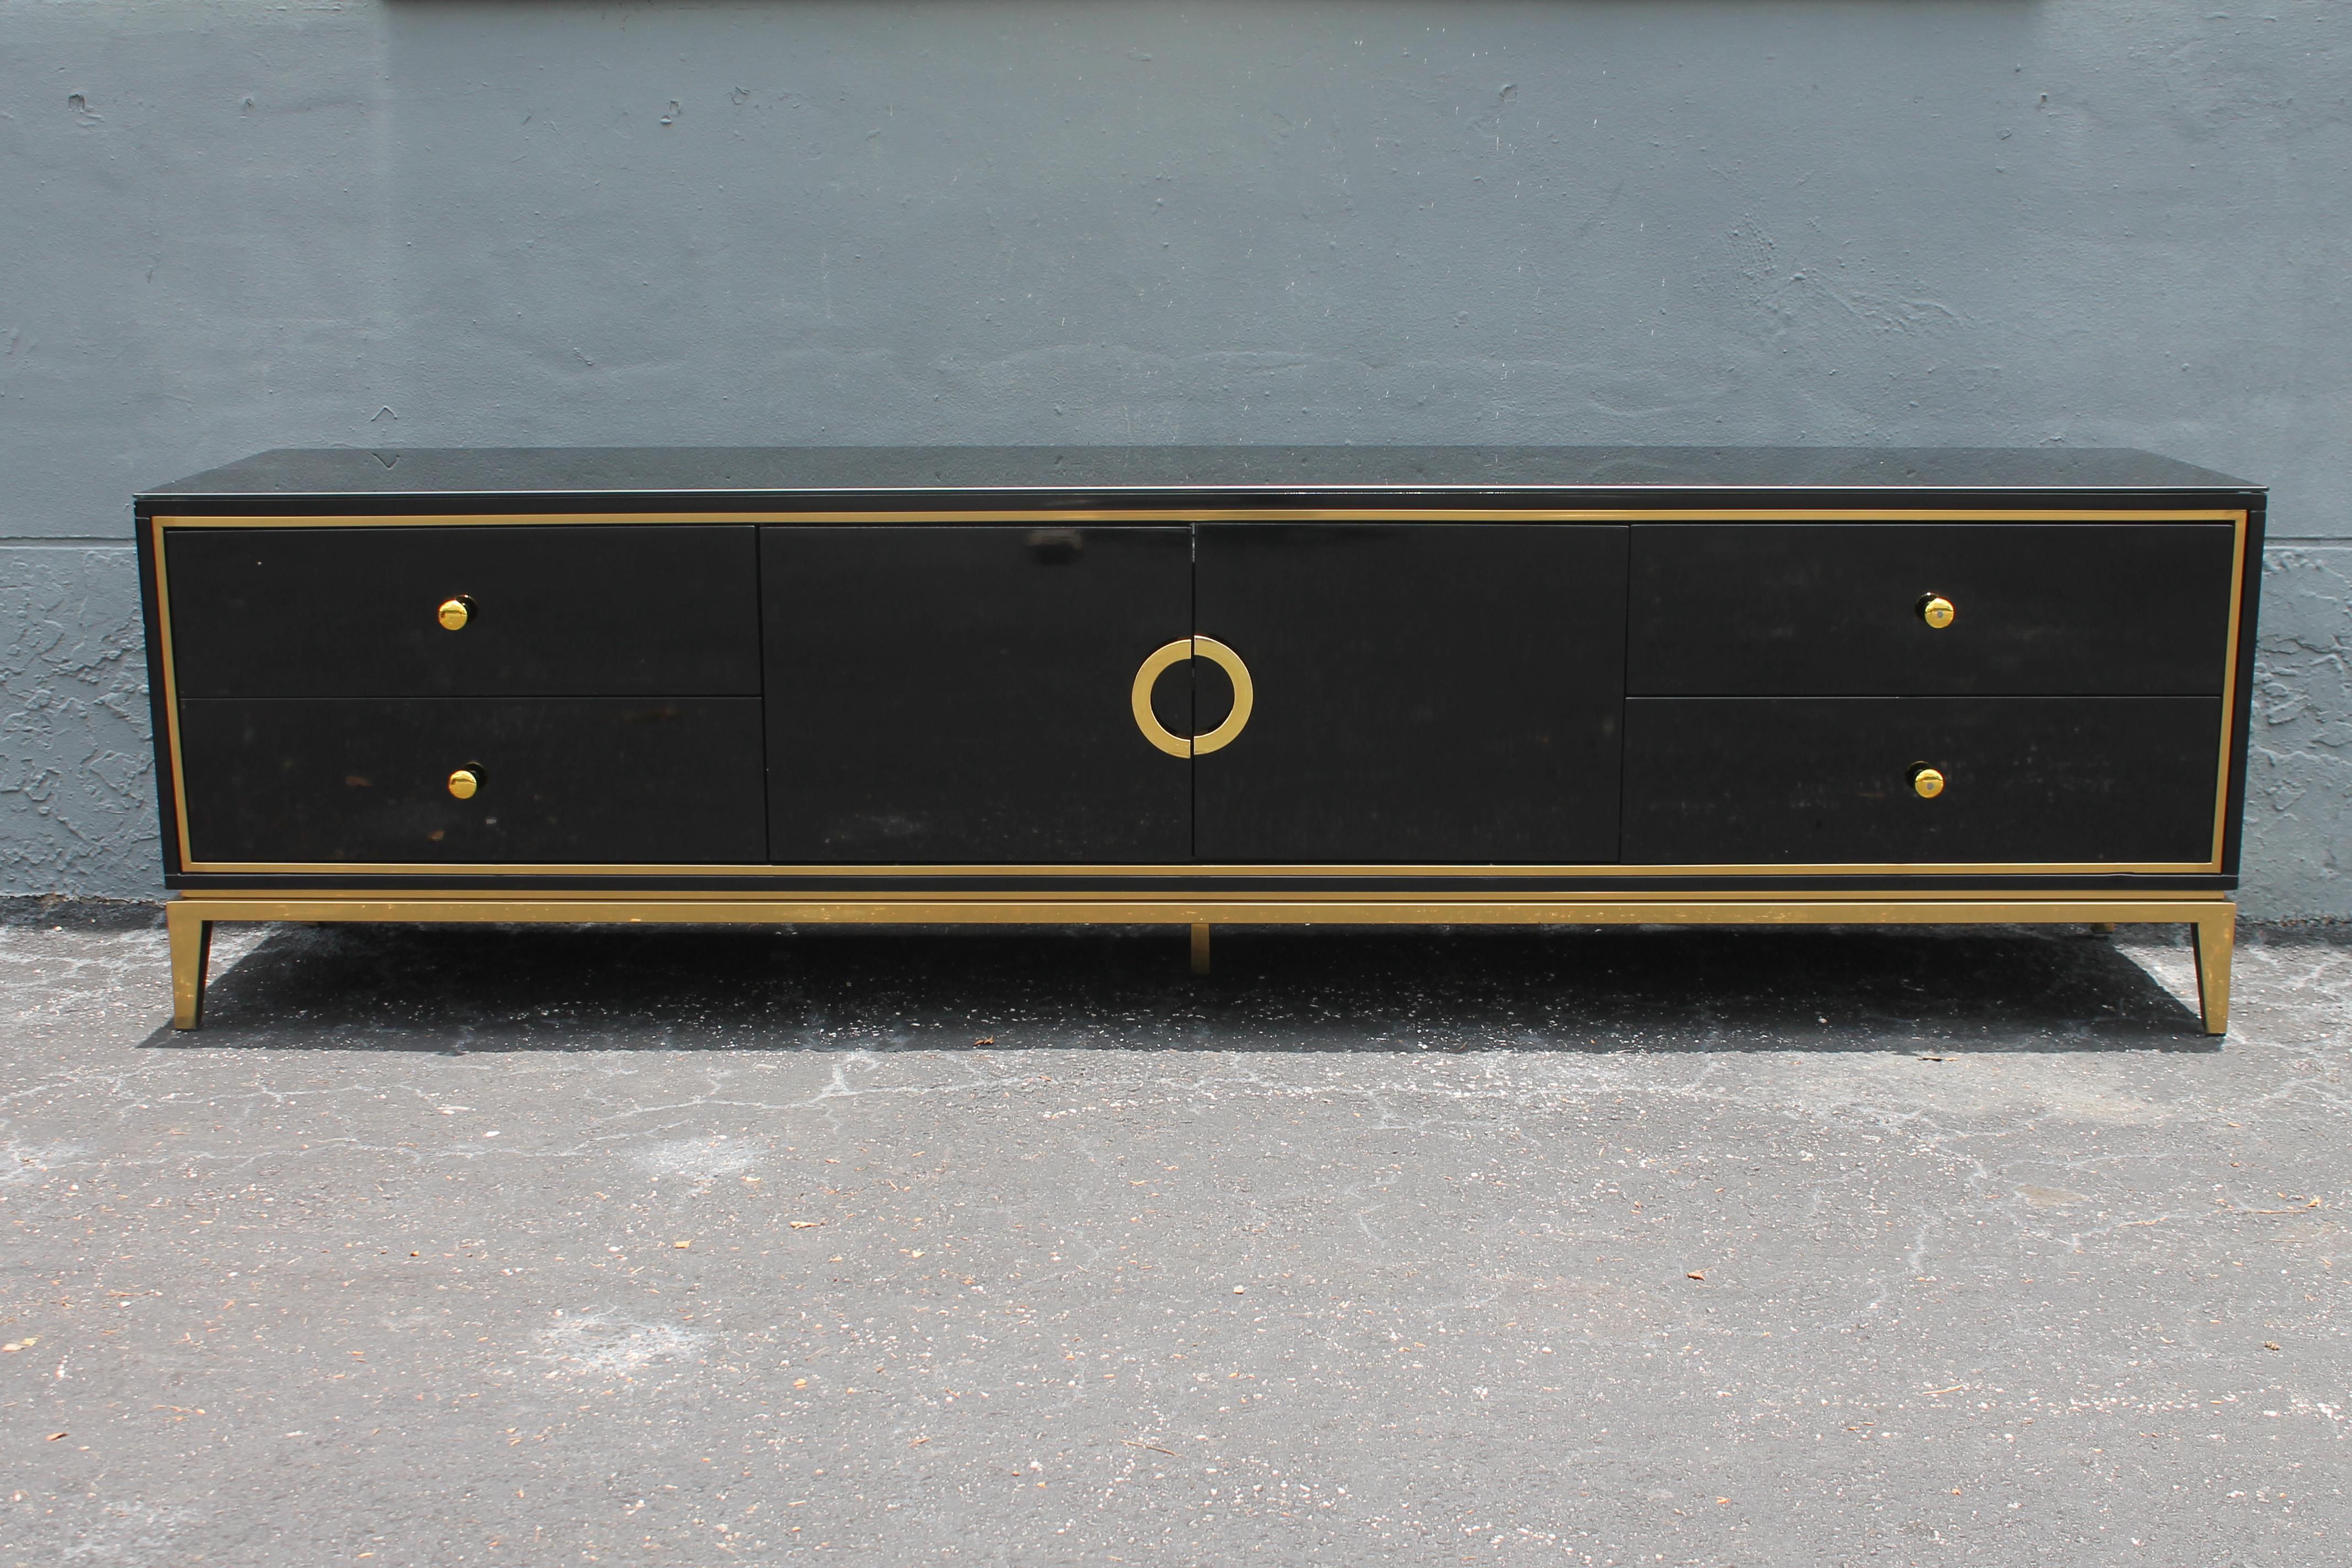 North American 1960's MCM Black Lacquer Low Buffet/ Console/ Credenza style Pierre Cardin